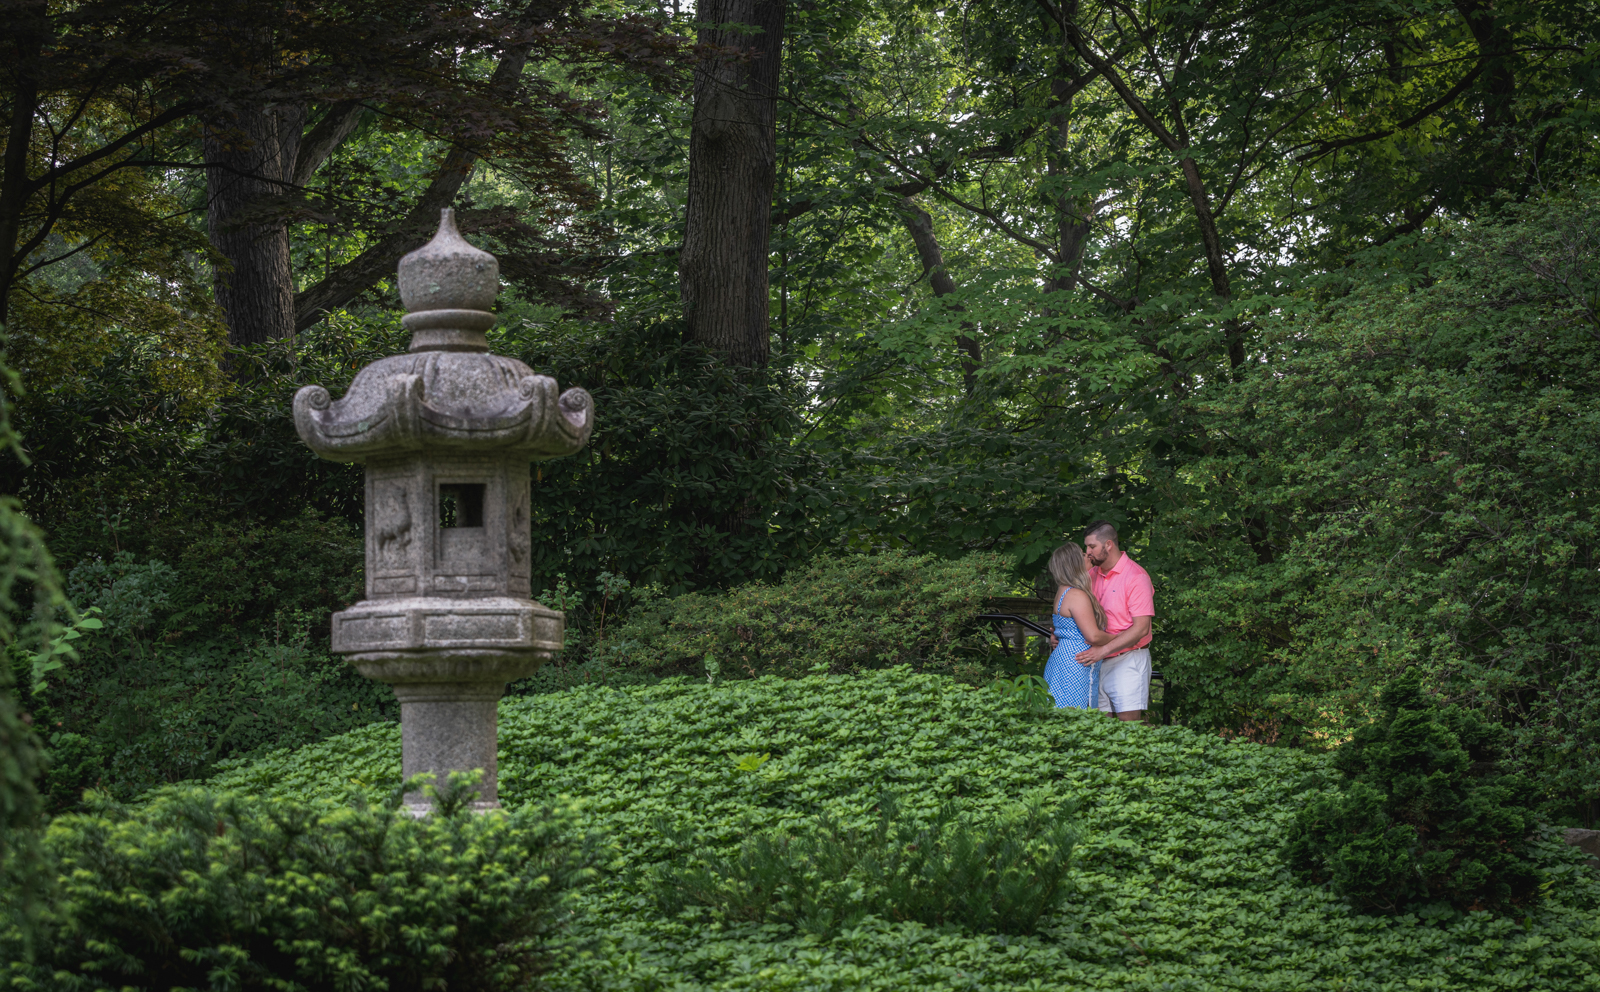 Capturing Love in Bloom: Ashley and Nick’s Engagement Session at Stan Hywet Gardens in Akron, Ohio